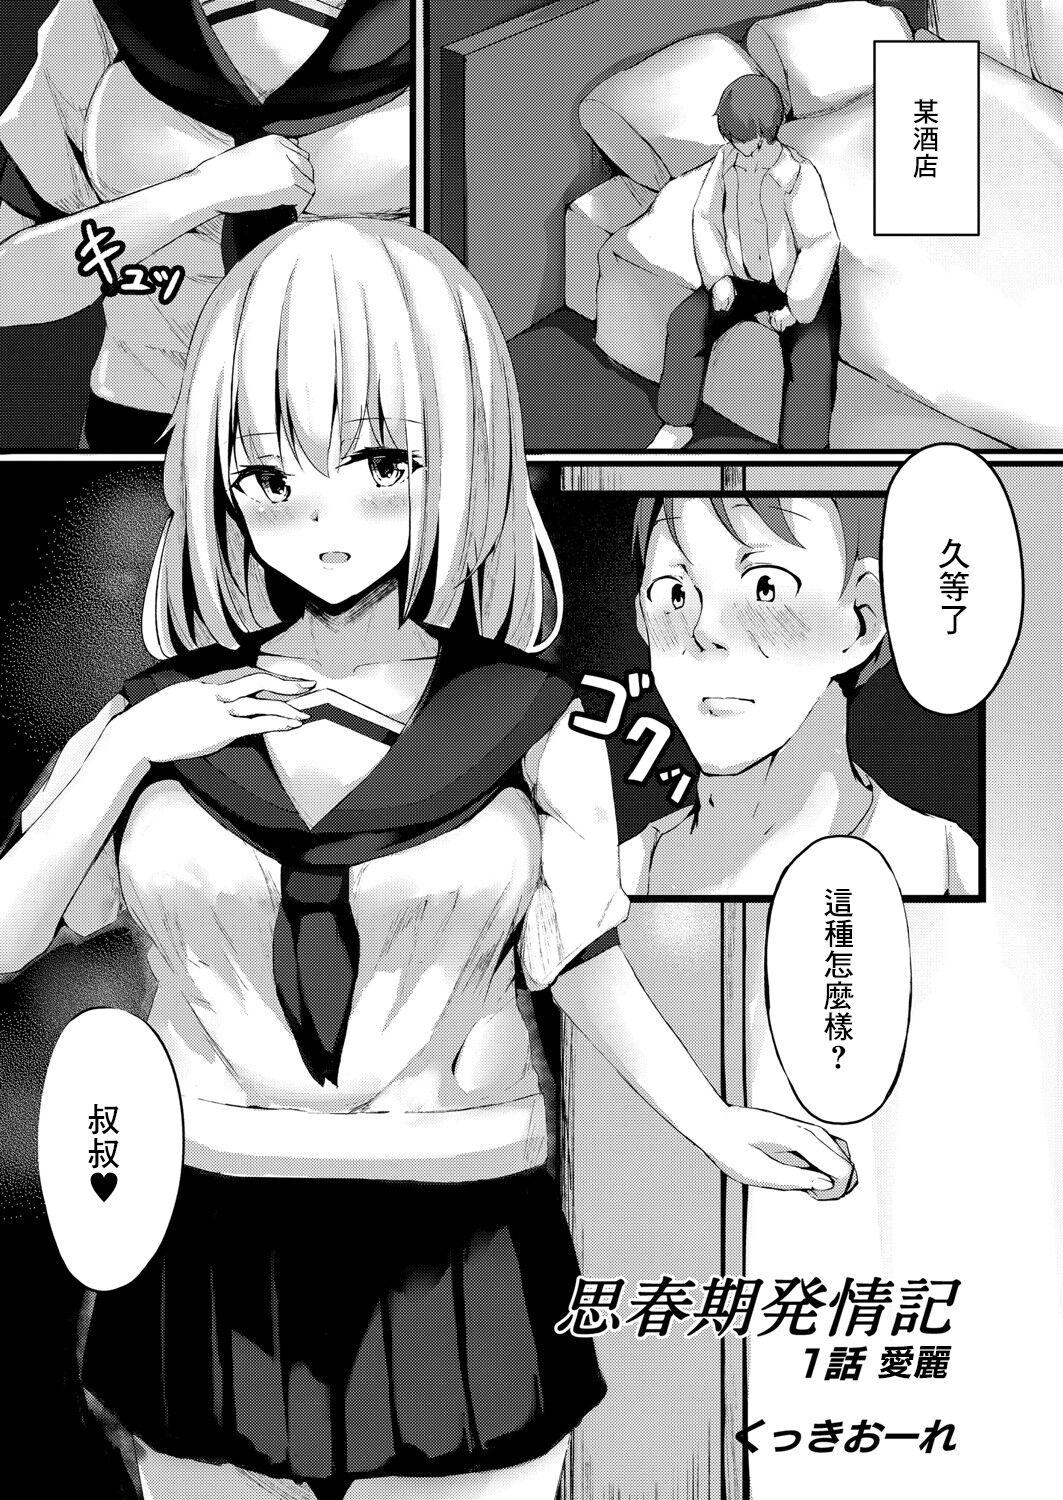 Cuckold 思春期発情記 1話 エリ Horny - Page 1